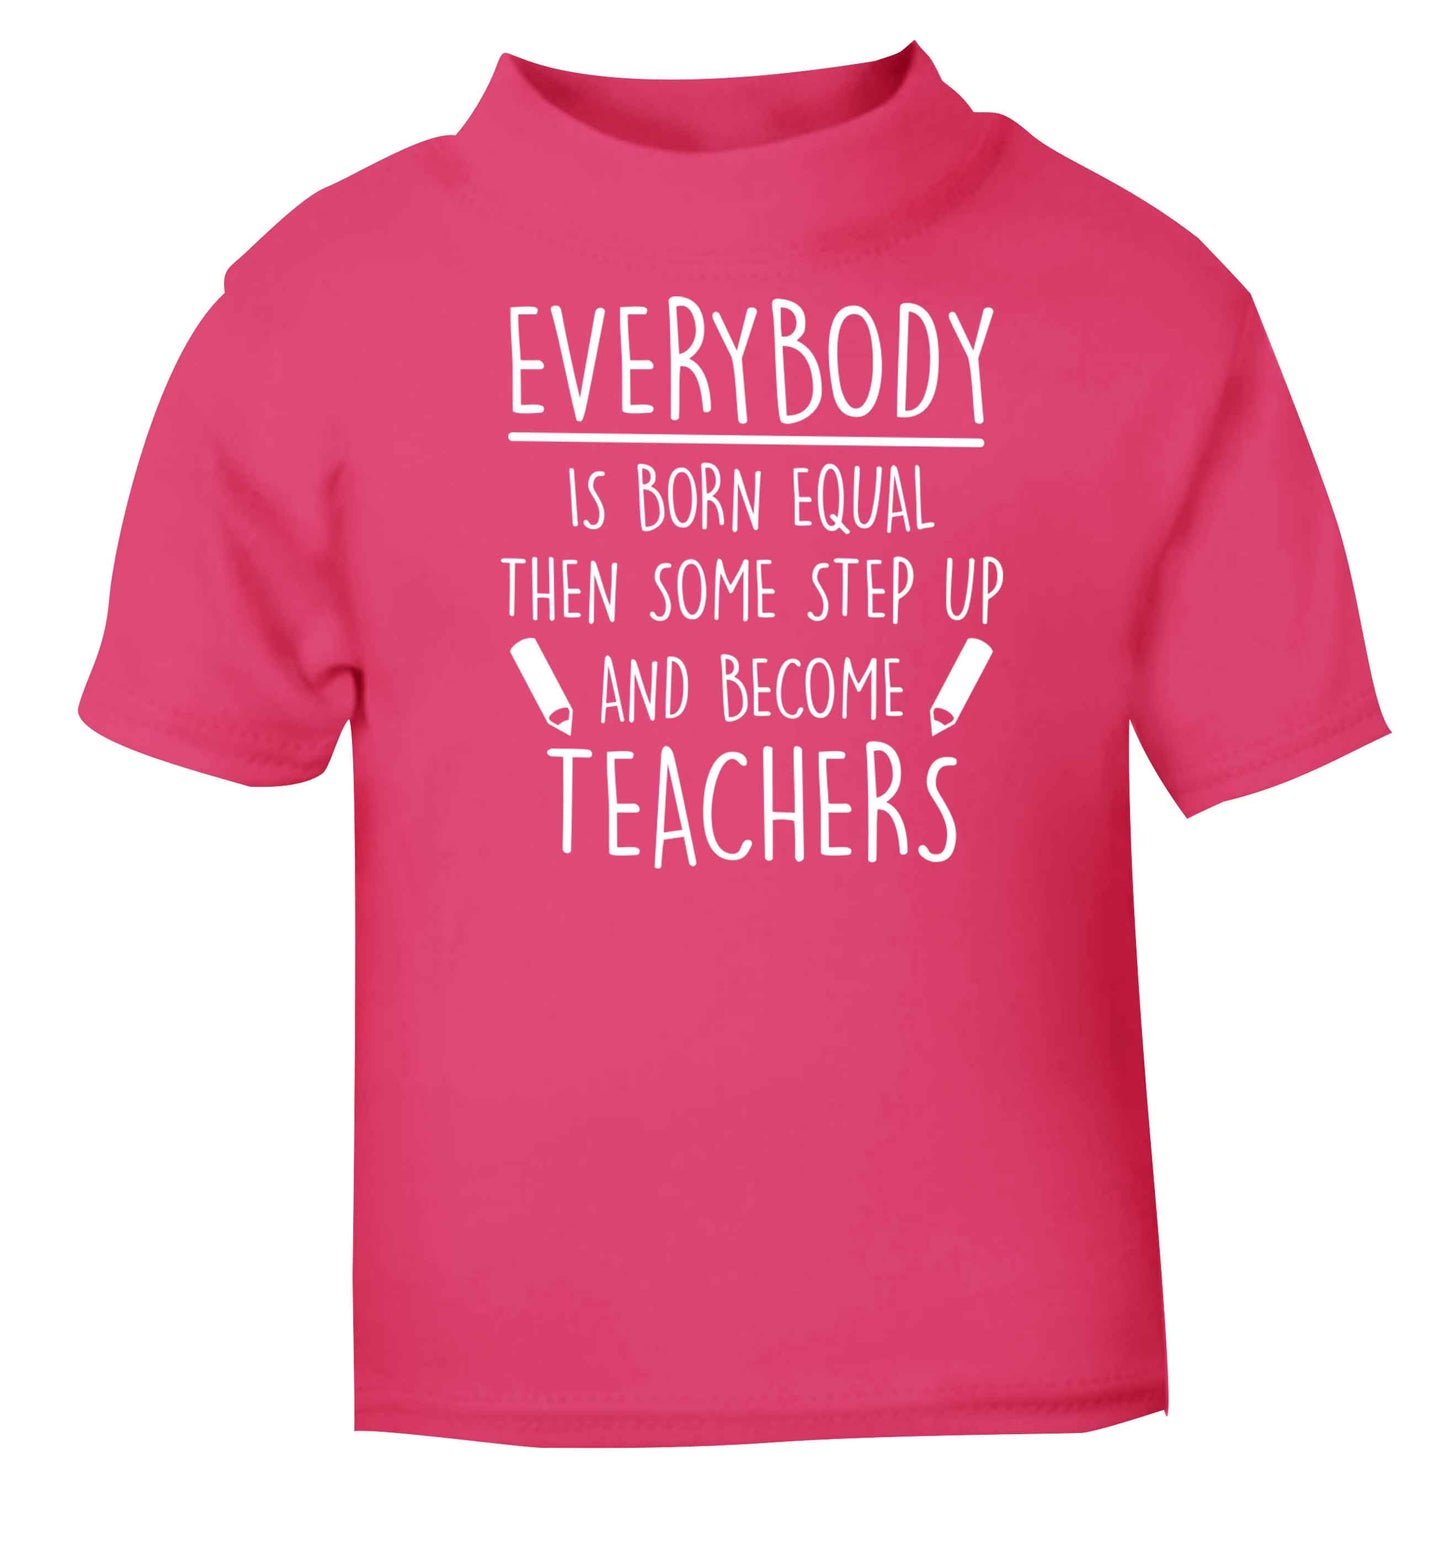 Everybody is born equal then some step up and become teachers pink baby toddler Tshirt 2 Years